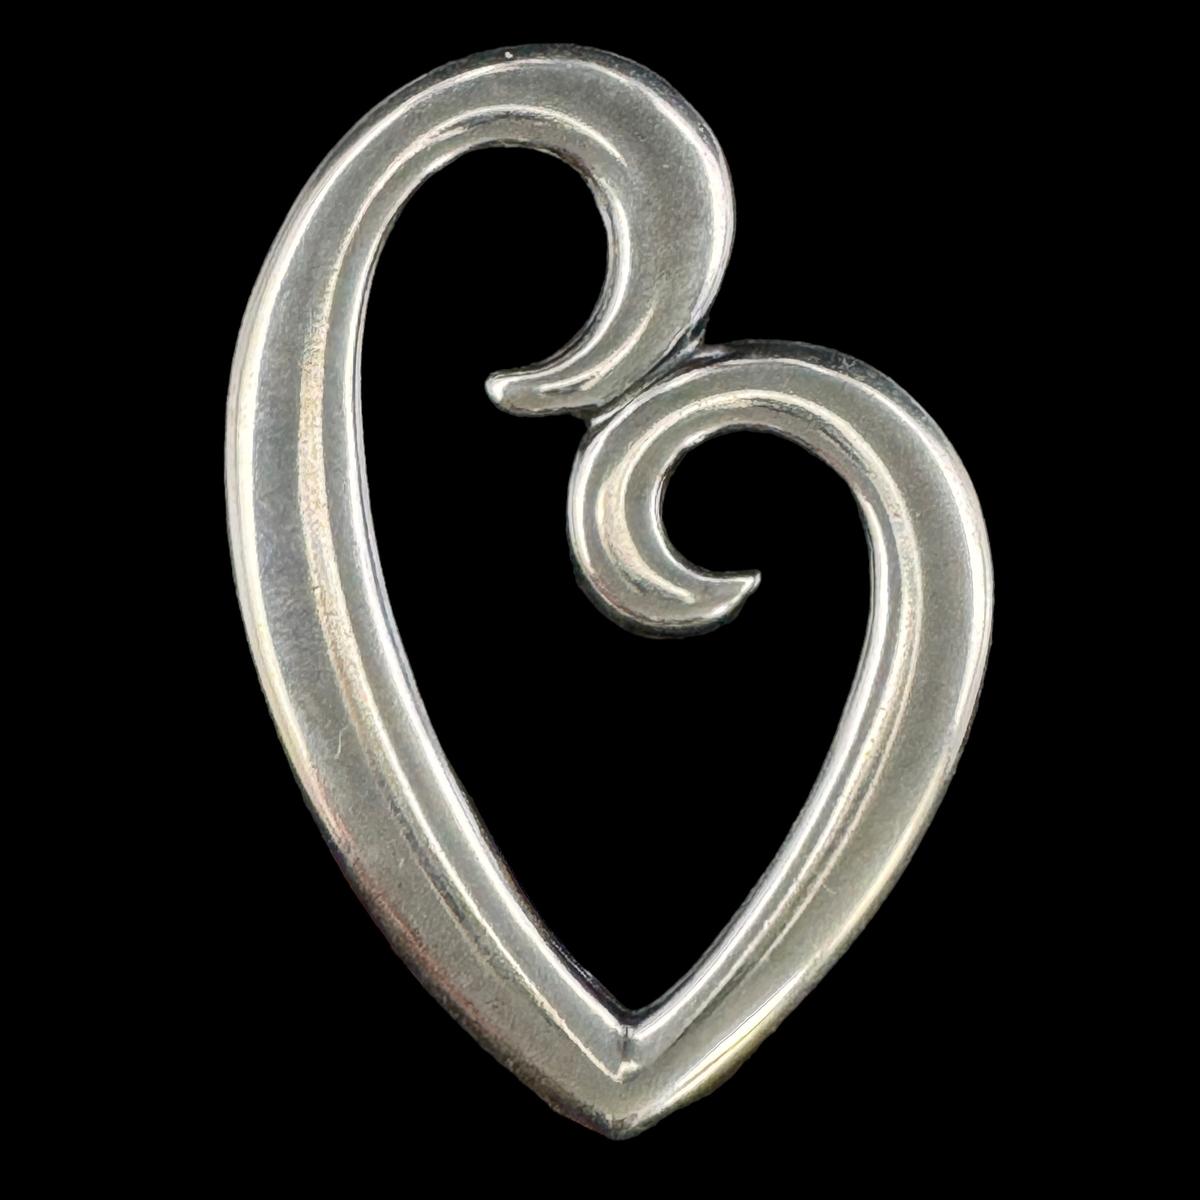 Estate James Avery sterling silver Mother's Love floating heart pendant